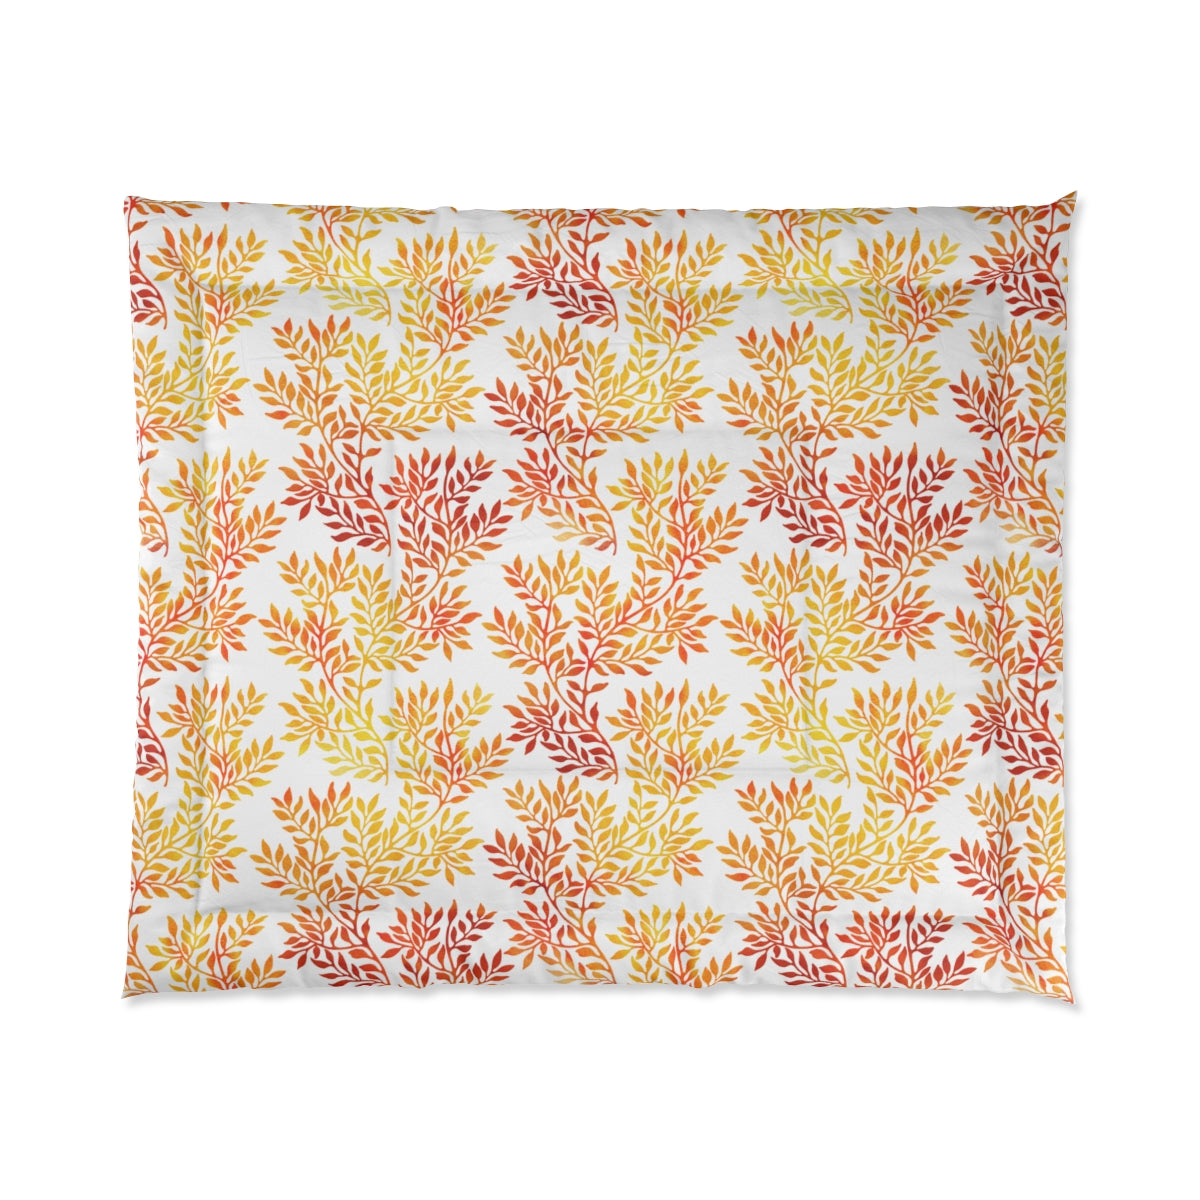 Fall Red and Orange Leaves Comforter